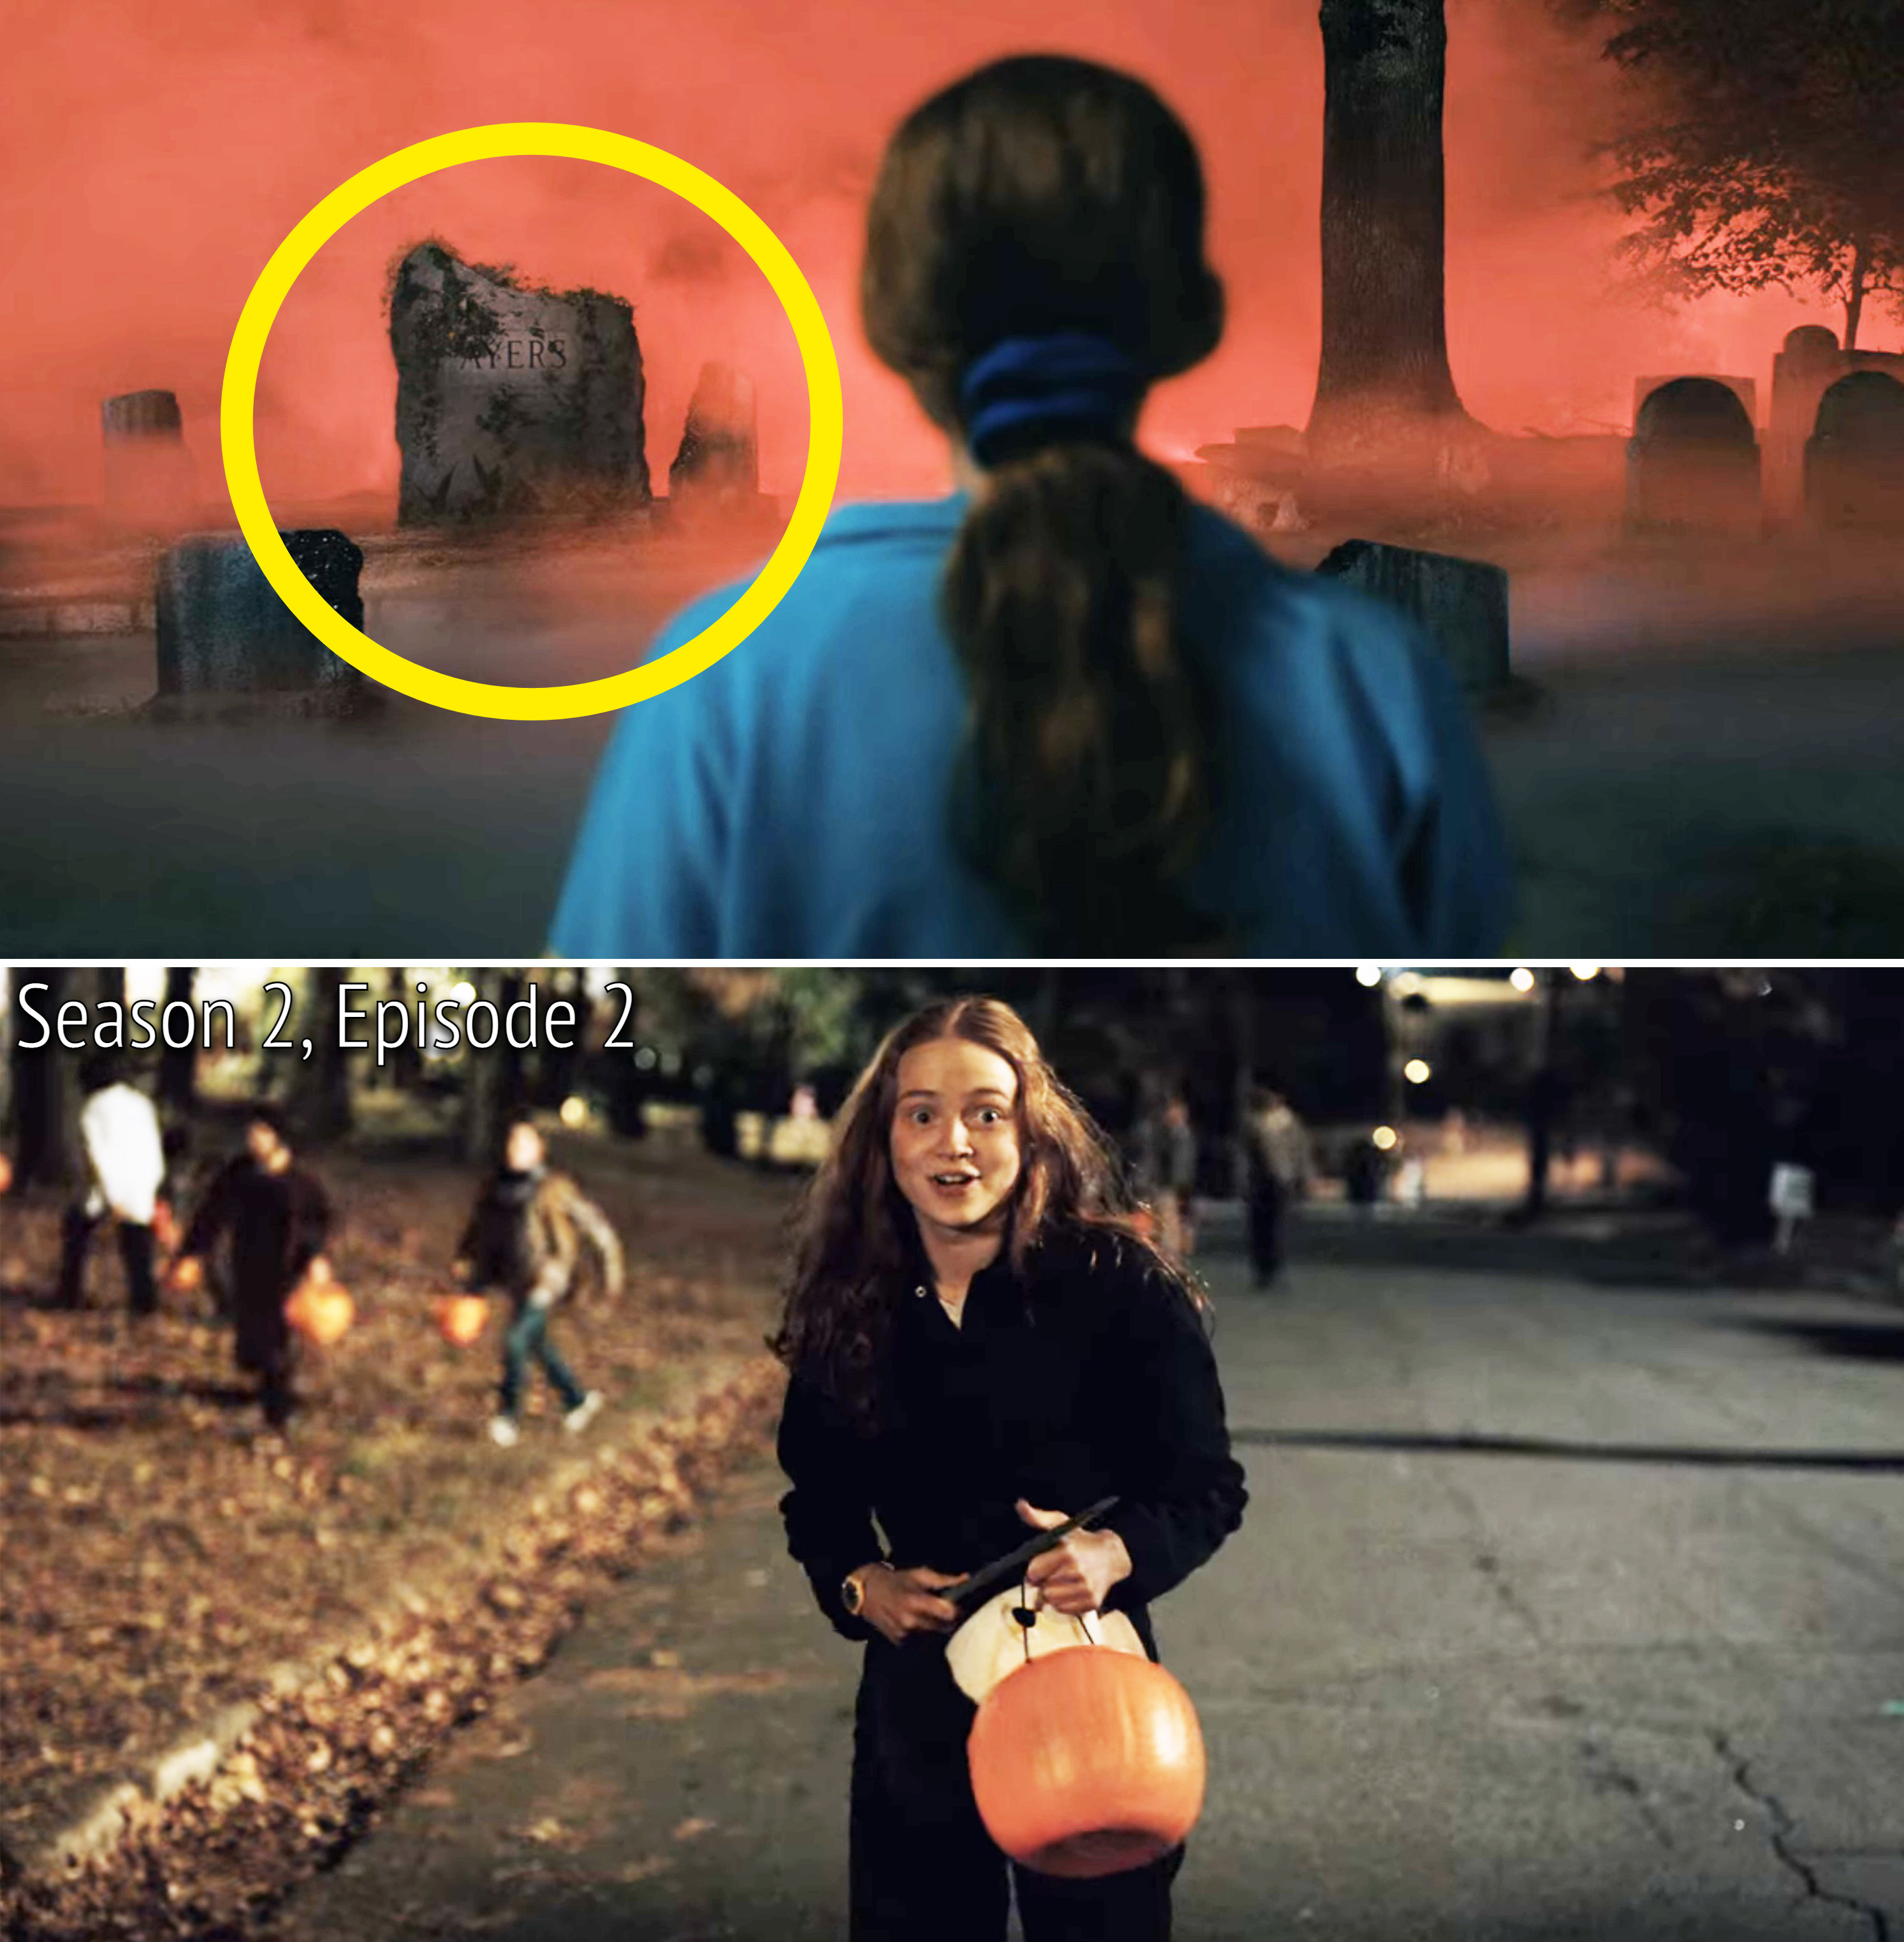 Max and the Myers headstone vs Max dressed as Michael Myers